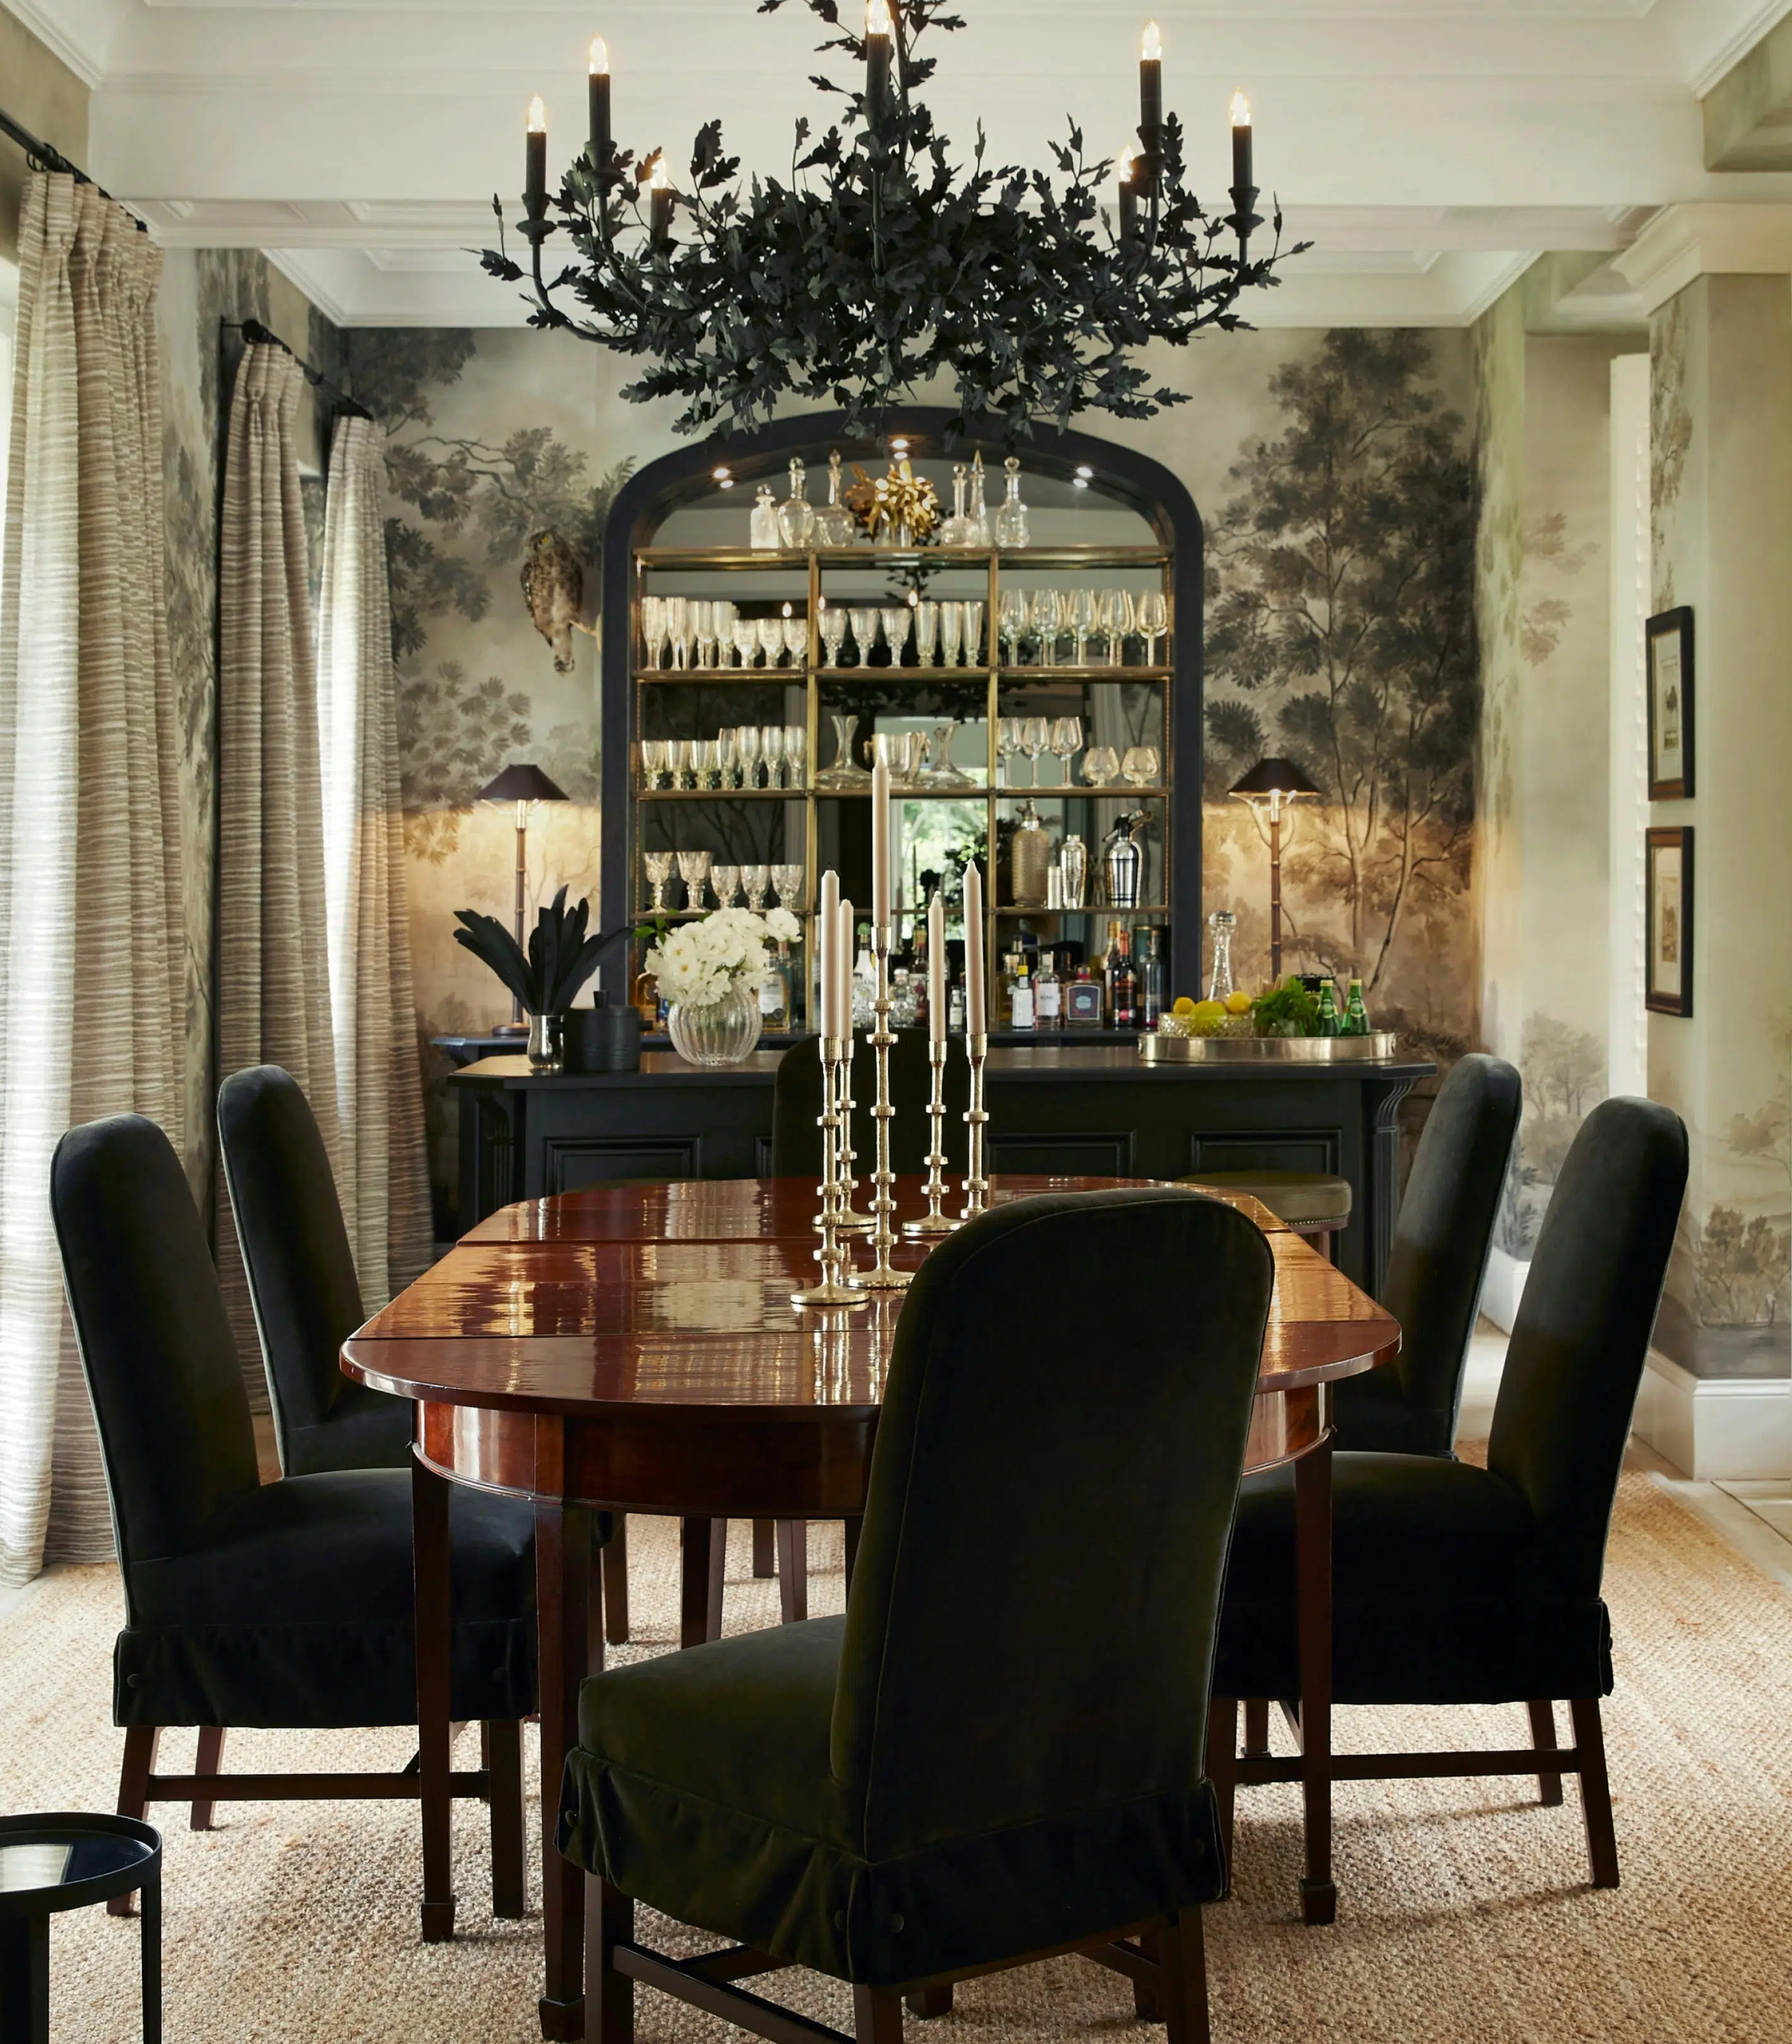 A polished wood dining table holds metal candlesticks and is surrounded by six chairs in a dark fabric. In the background, a tall mirrored sideboard holds stemware, vases and a pair of lamps.